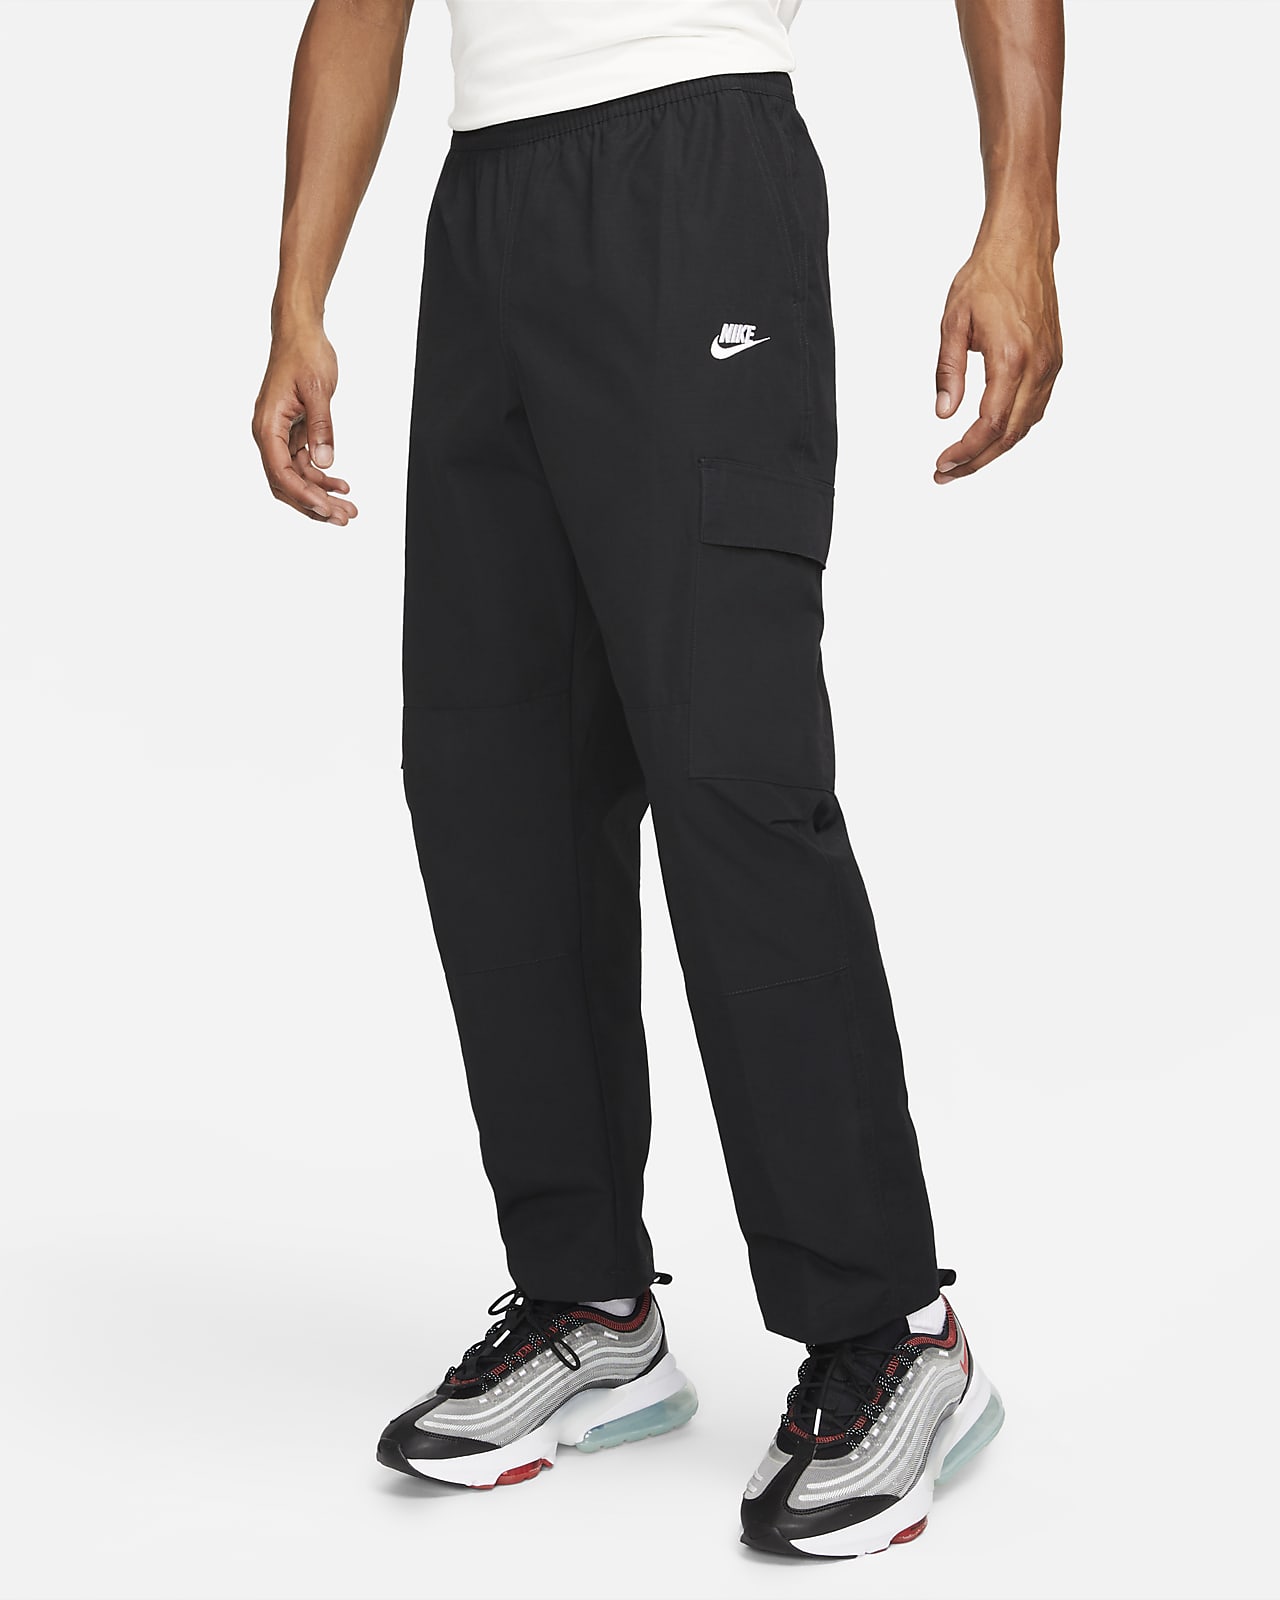 https://static.nike.com/a/images/t_PDP_1280_v1/f_auto,q_auto:eco/e686fc6a-ff3a-41b8-ab2d-62af964b1e5c/club-woven-cargo-trousers-37q0b1.png